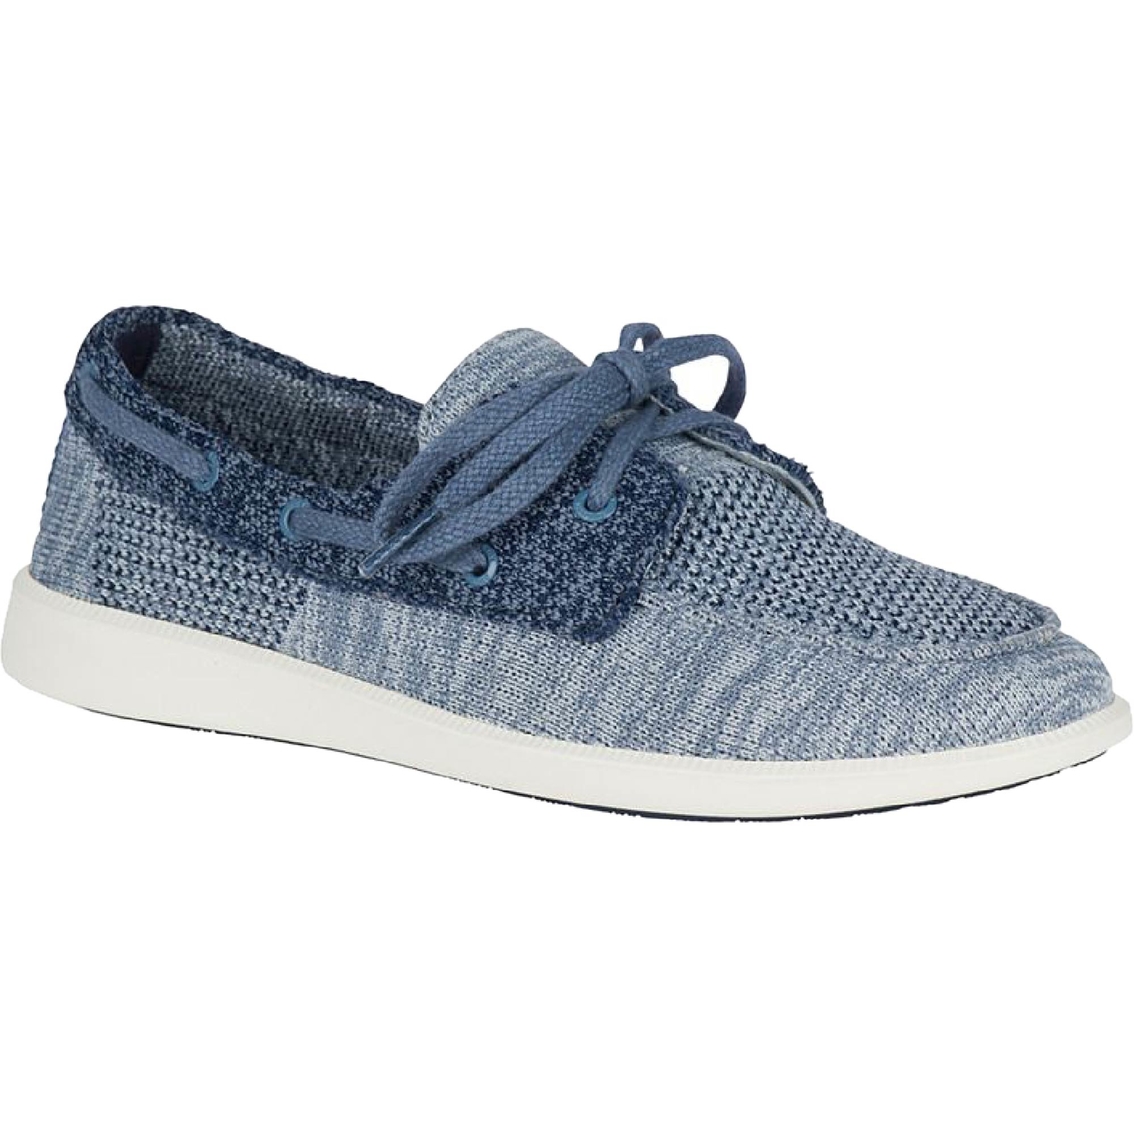 sperry knit shoes